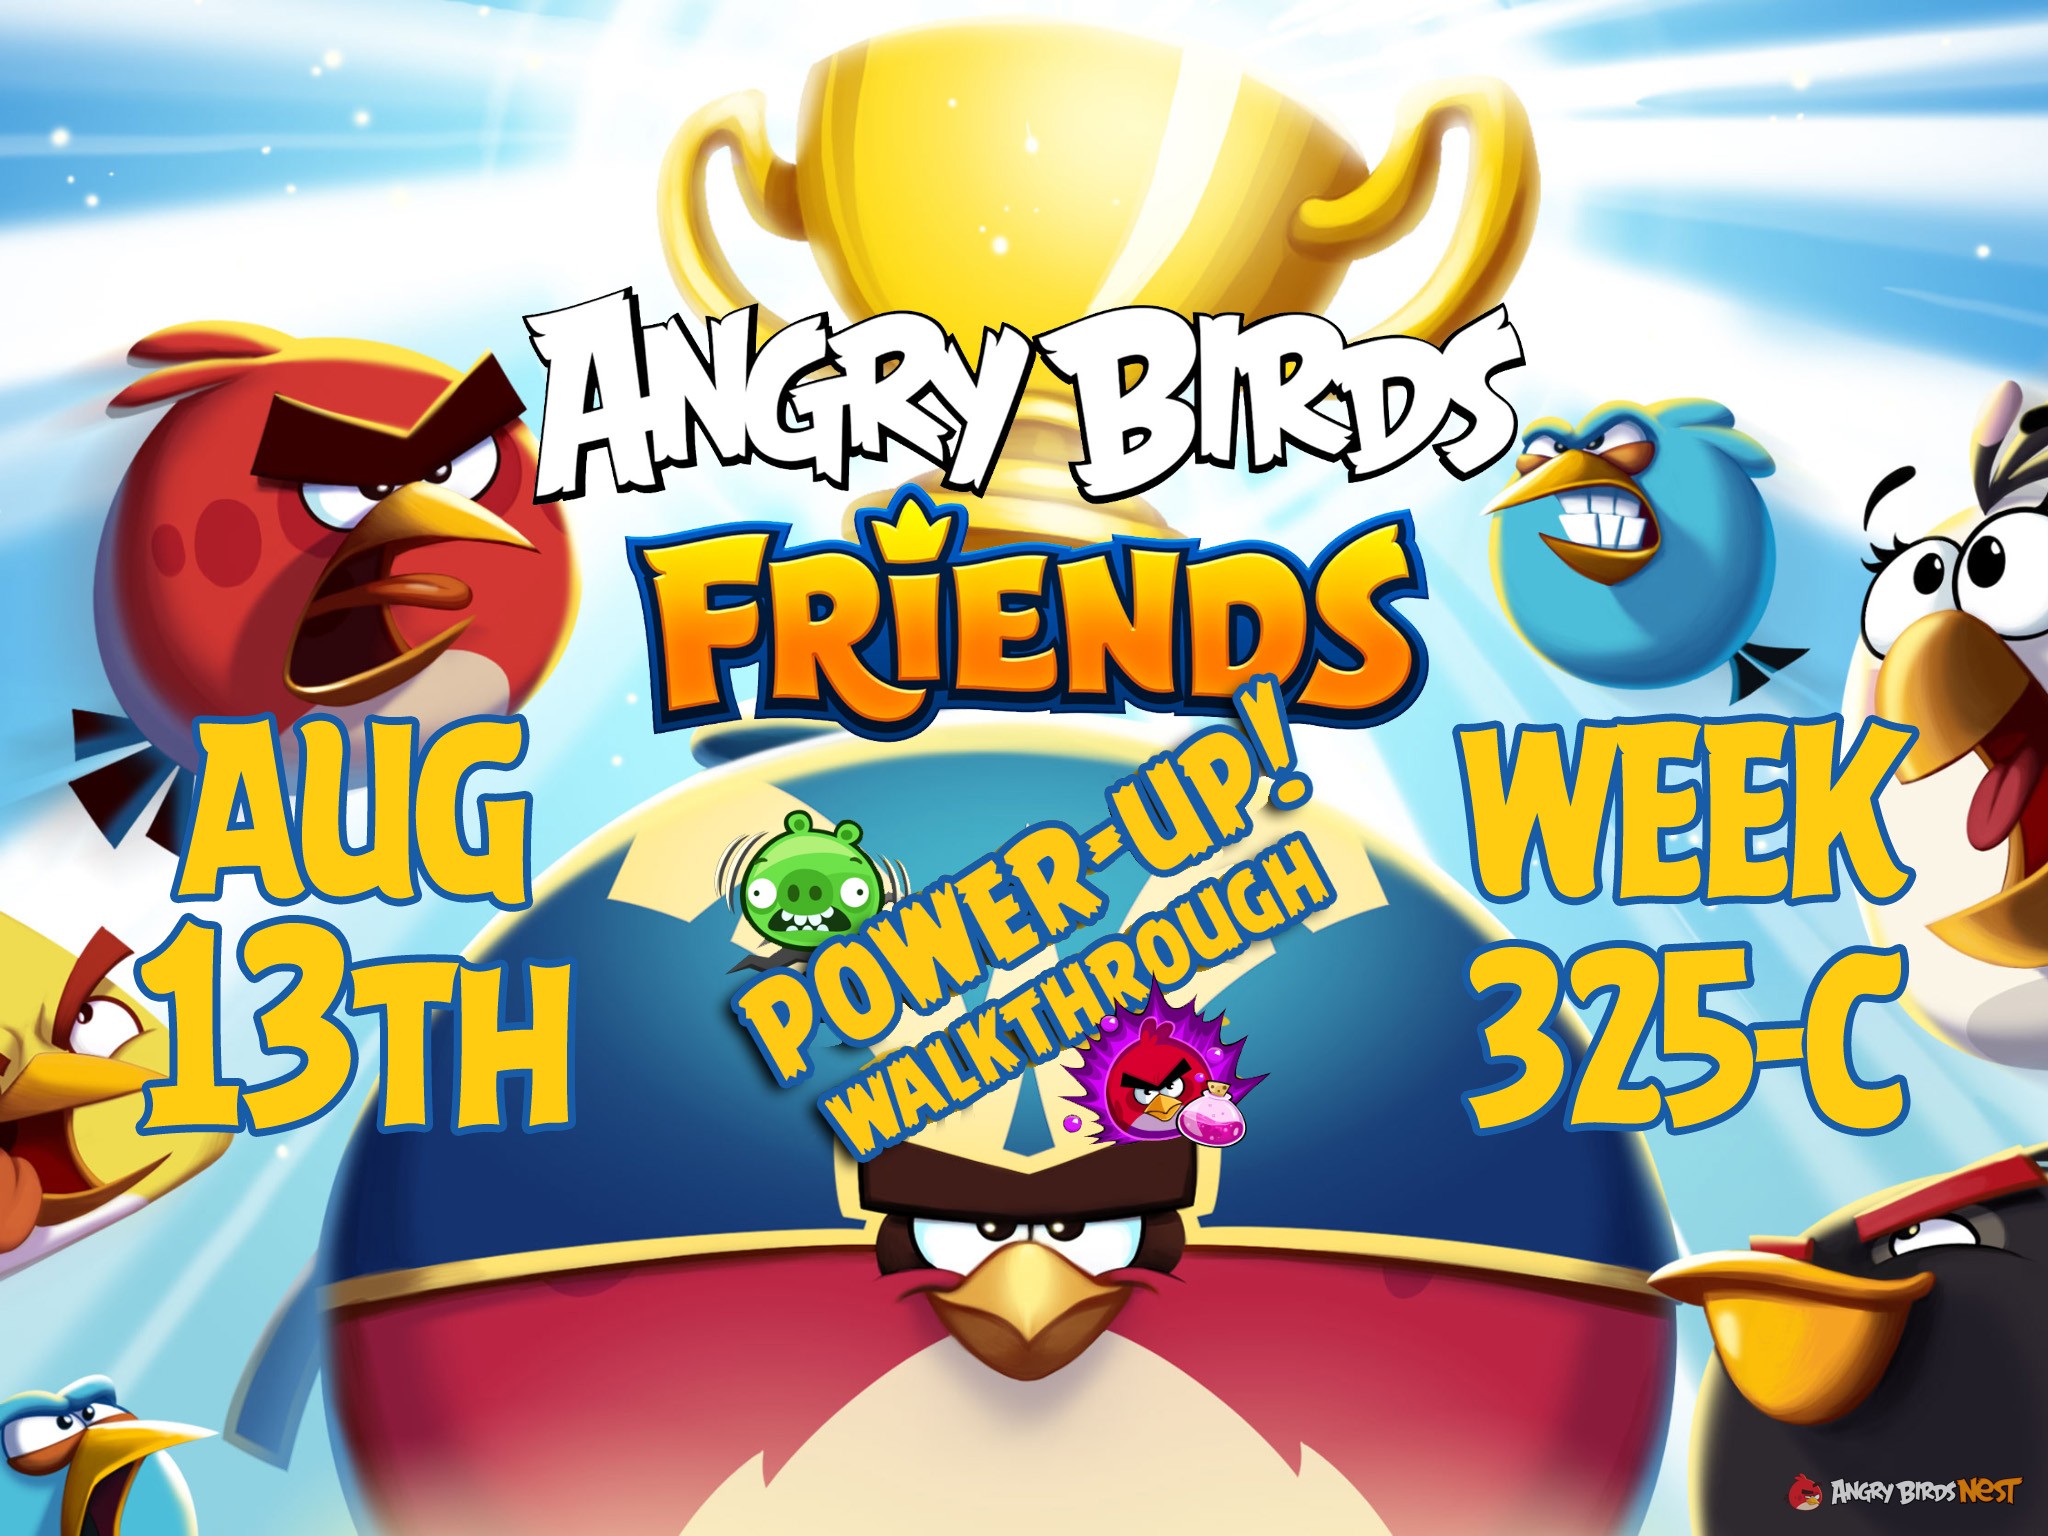 Angry-Birds-Friends-Tournament-Week-325-C-Feature-Image-PU